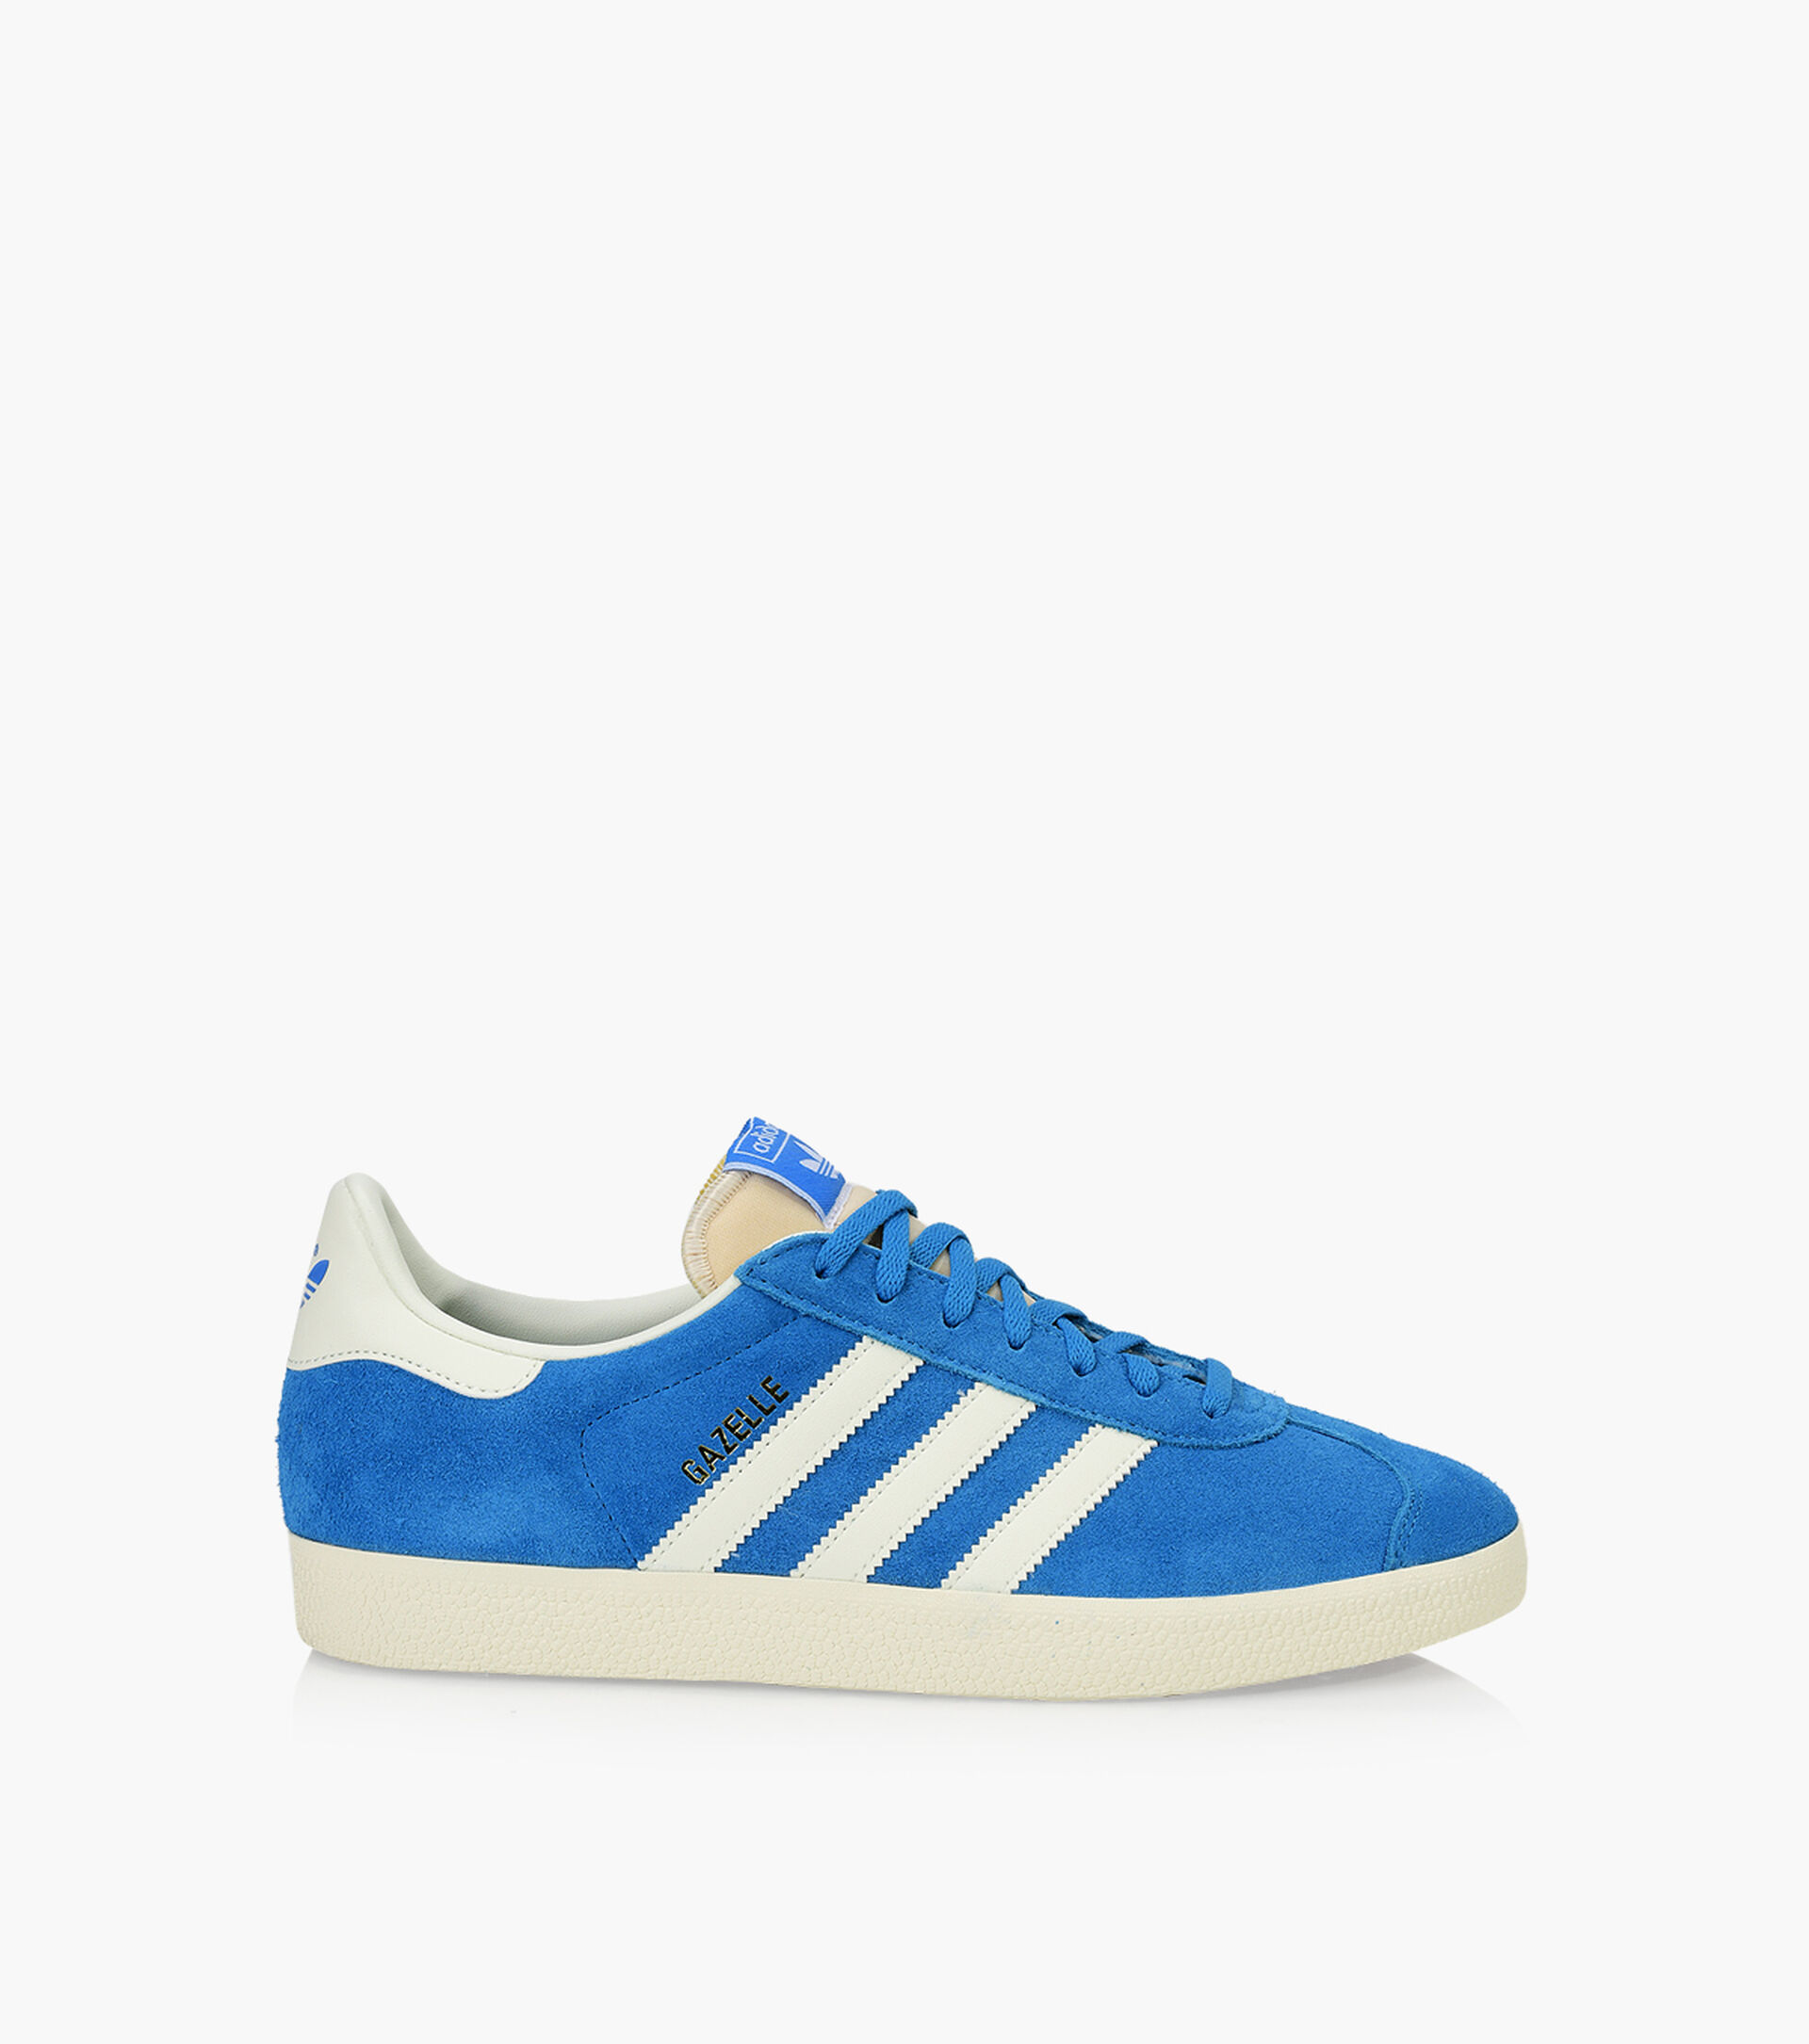 ADIDAS GAZELLE - Blue Suede | Browns Shoes